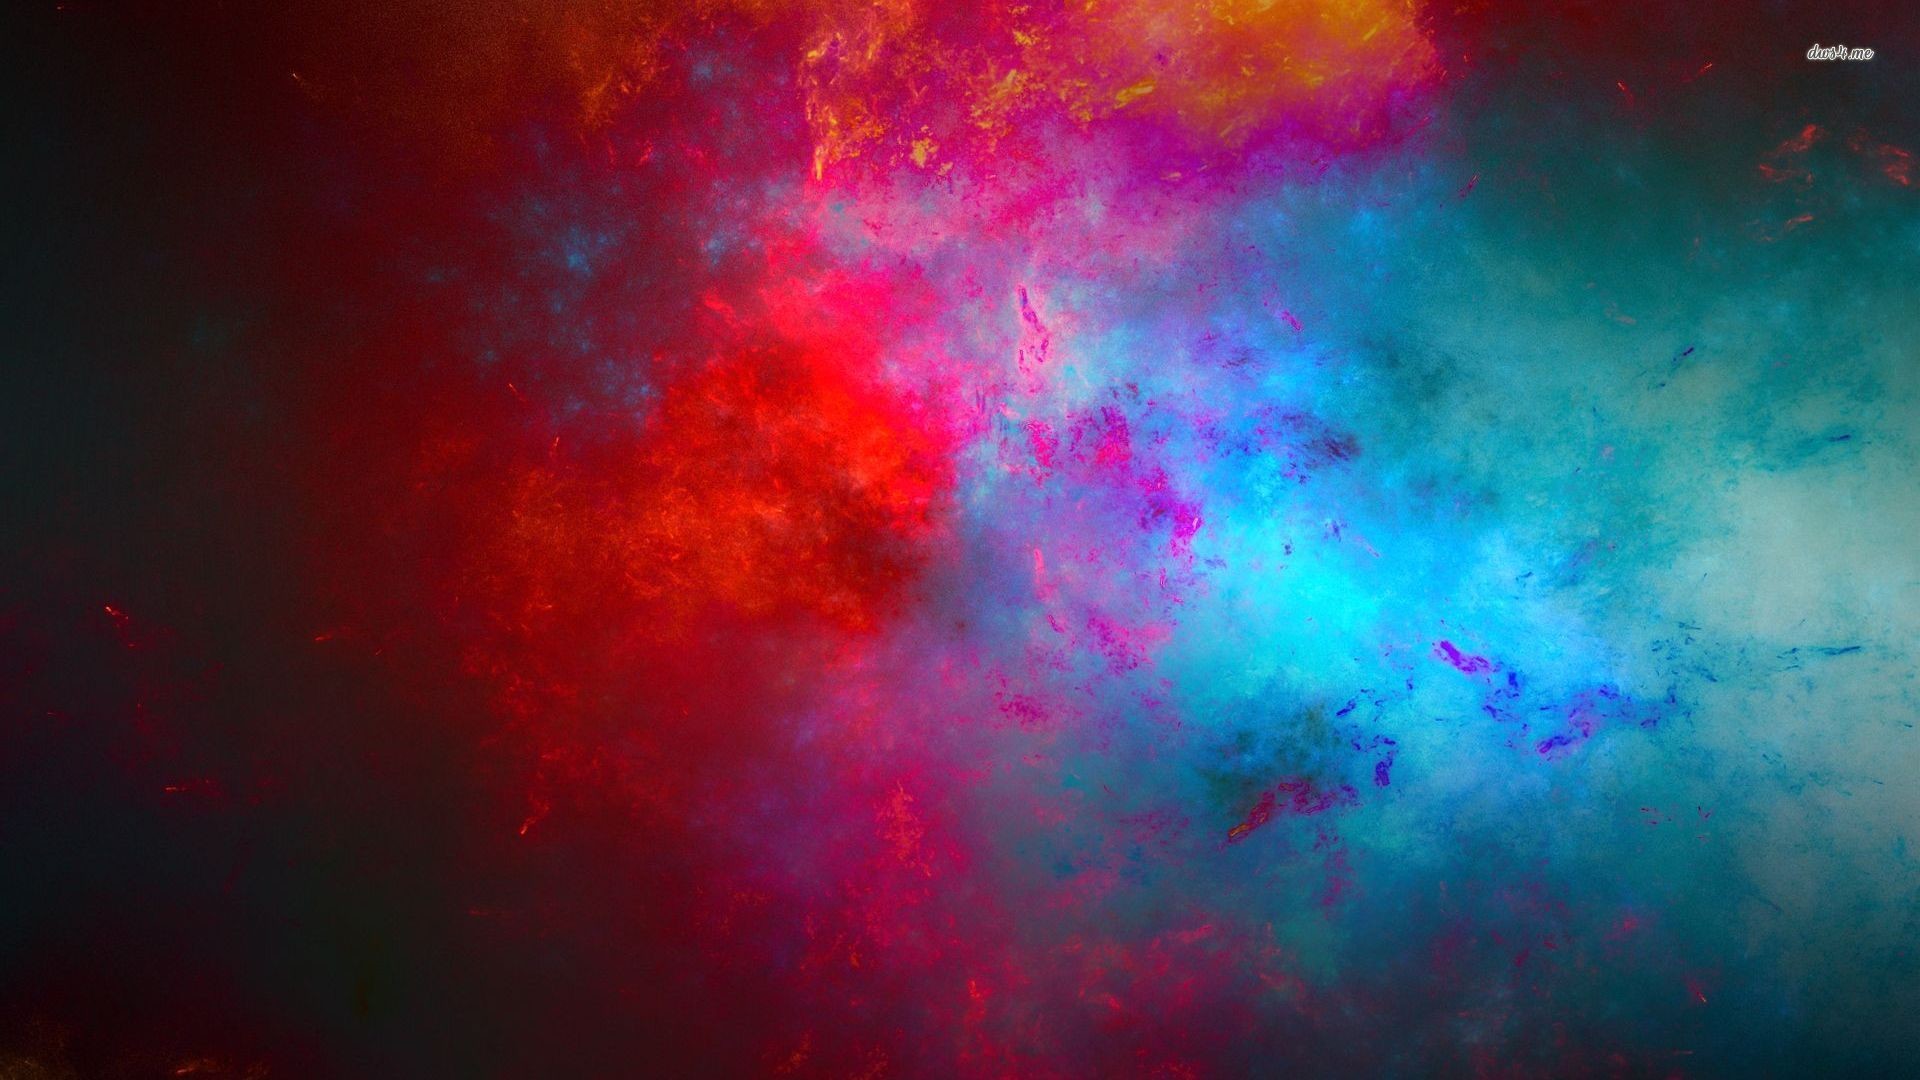 5262-red-and-blue-cloud-1920×1080-abstract-wallpaper.